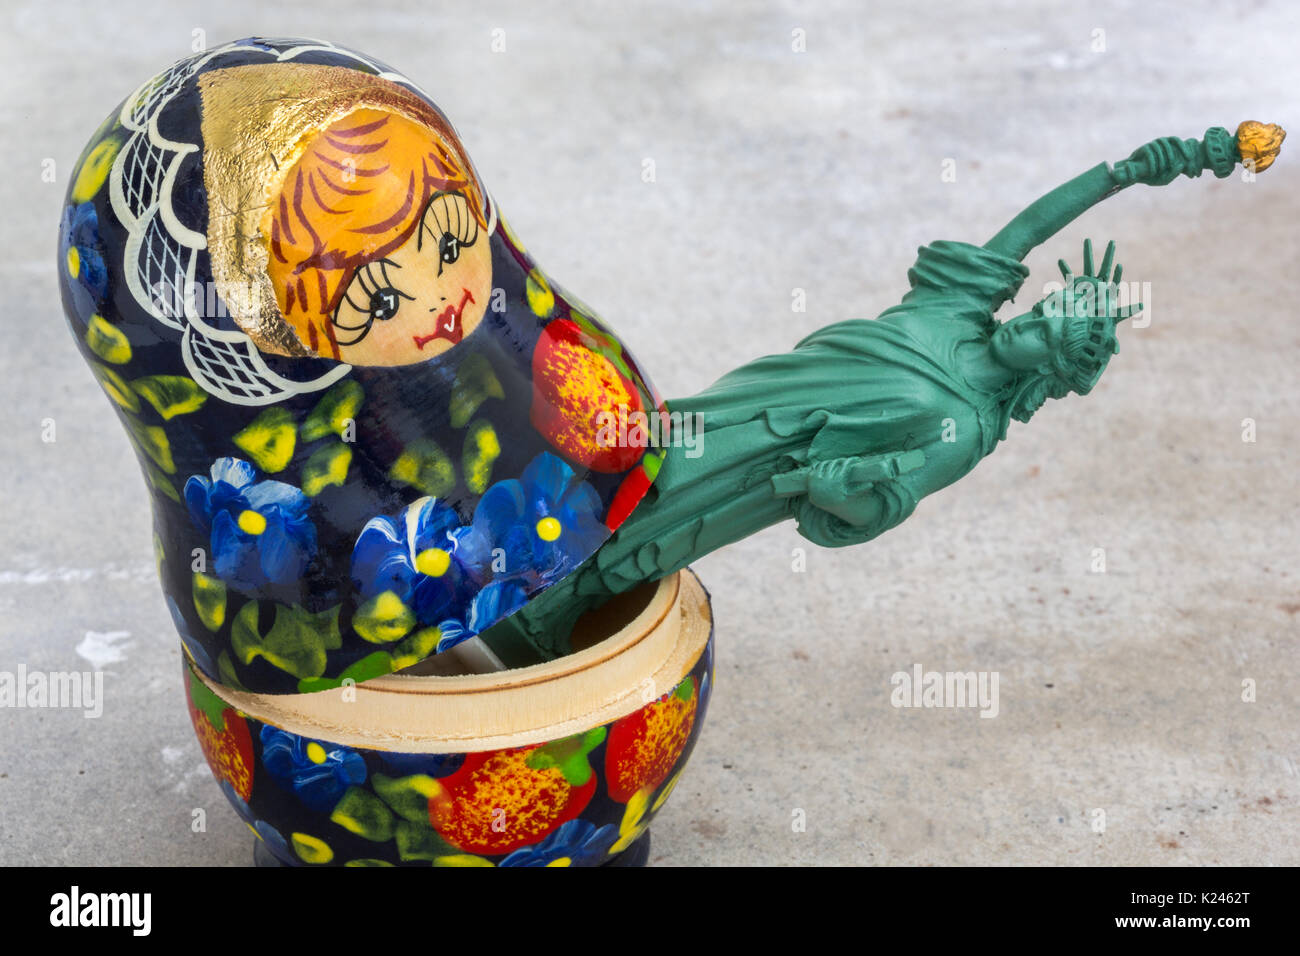 A model of the Statue of Liberty inside a Russian Matryoshka doll (concept) Stock Photo